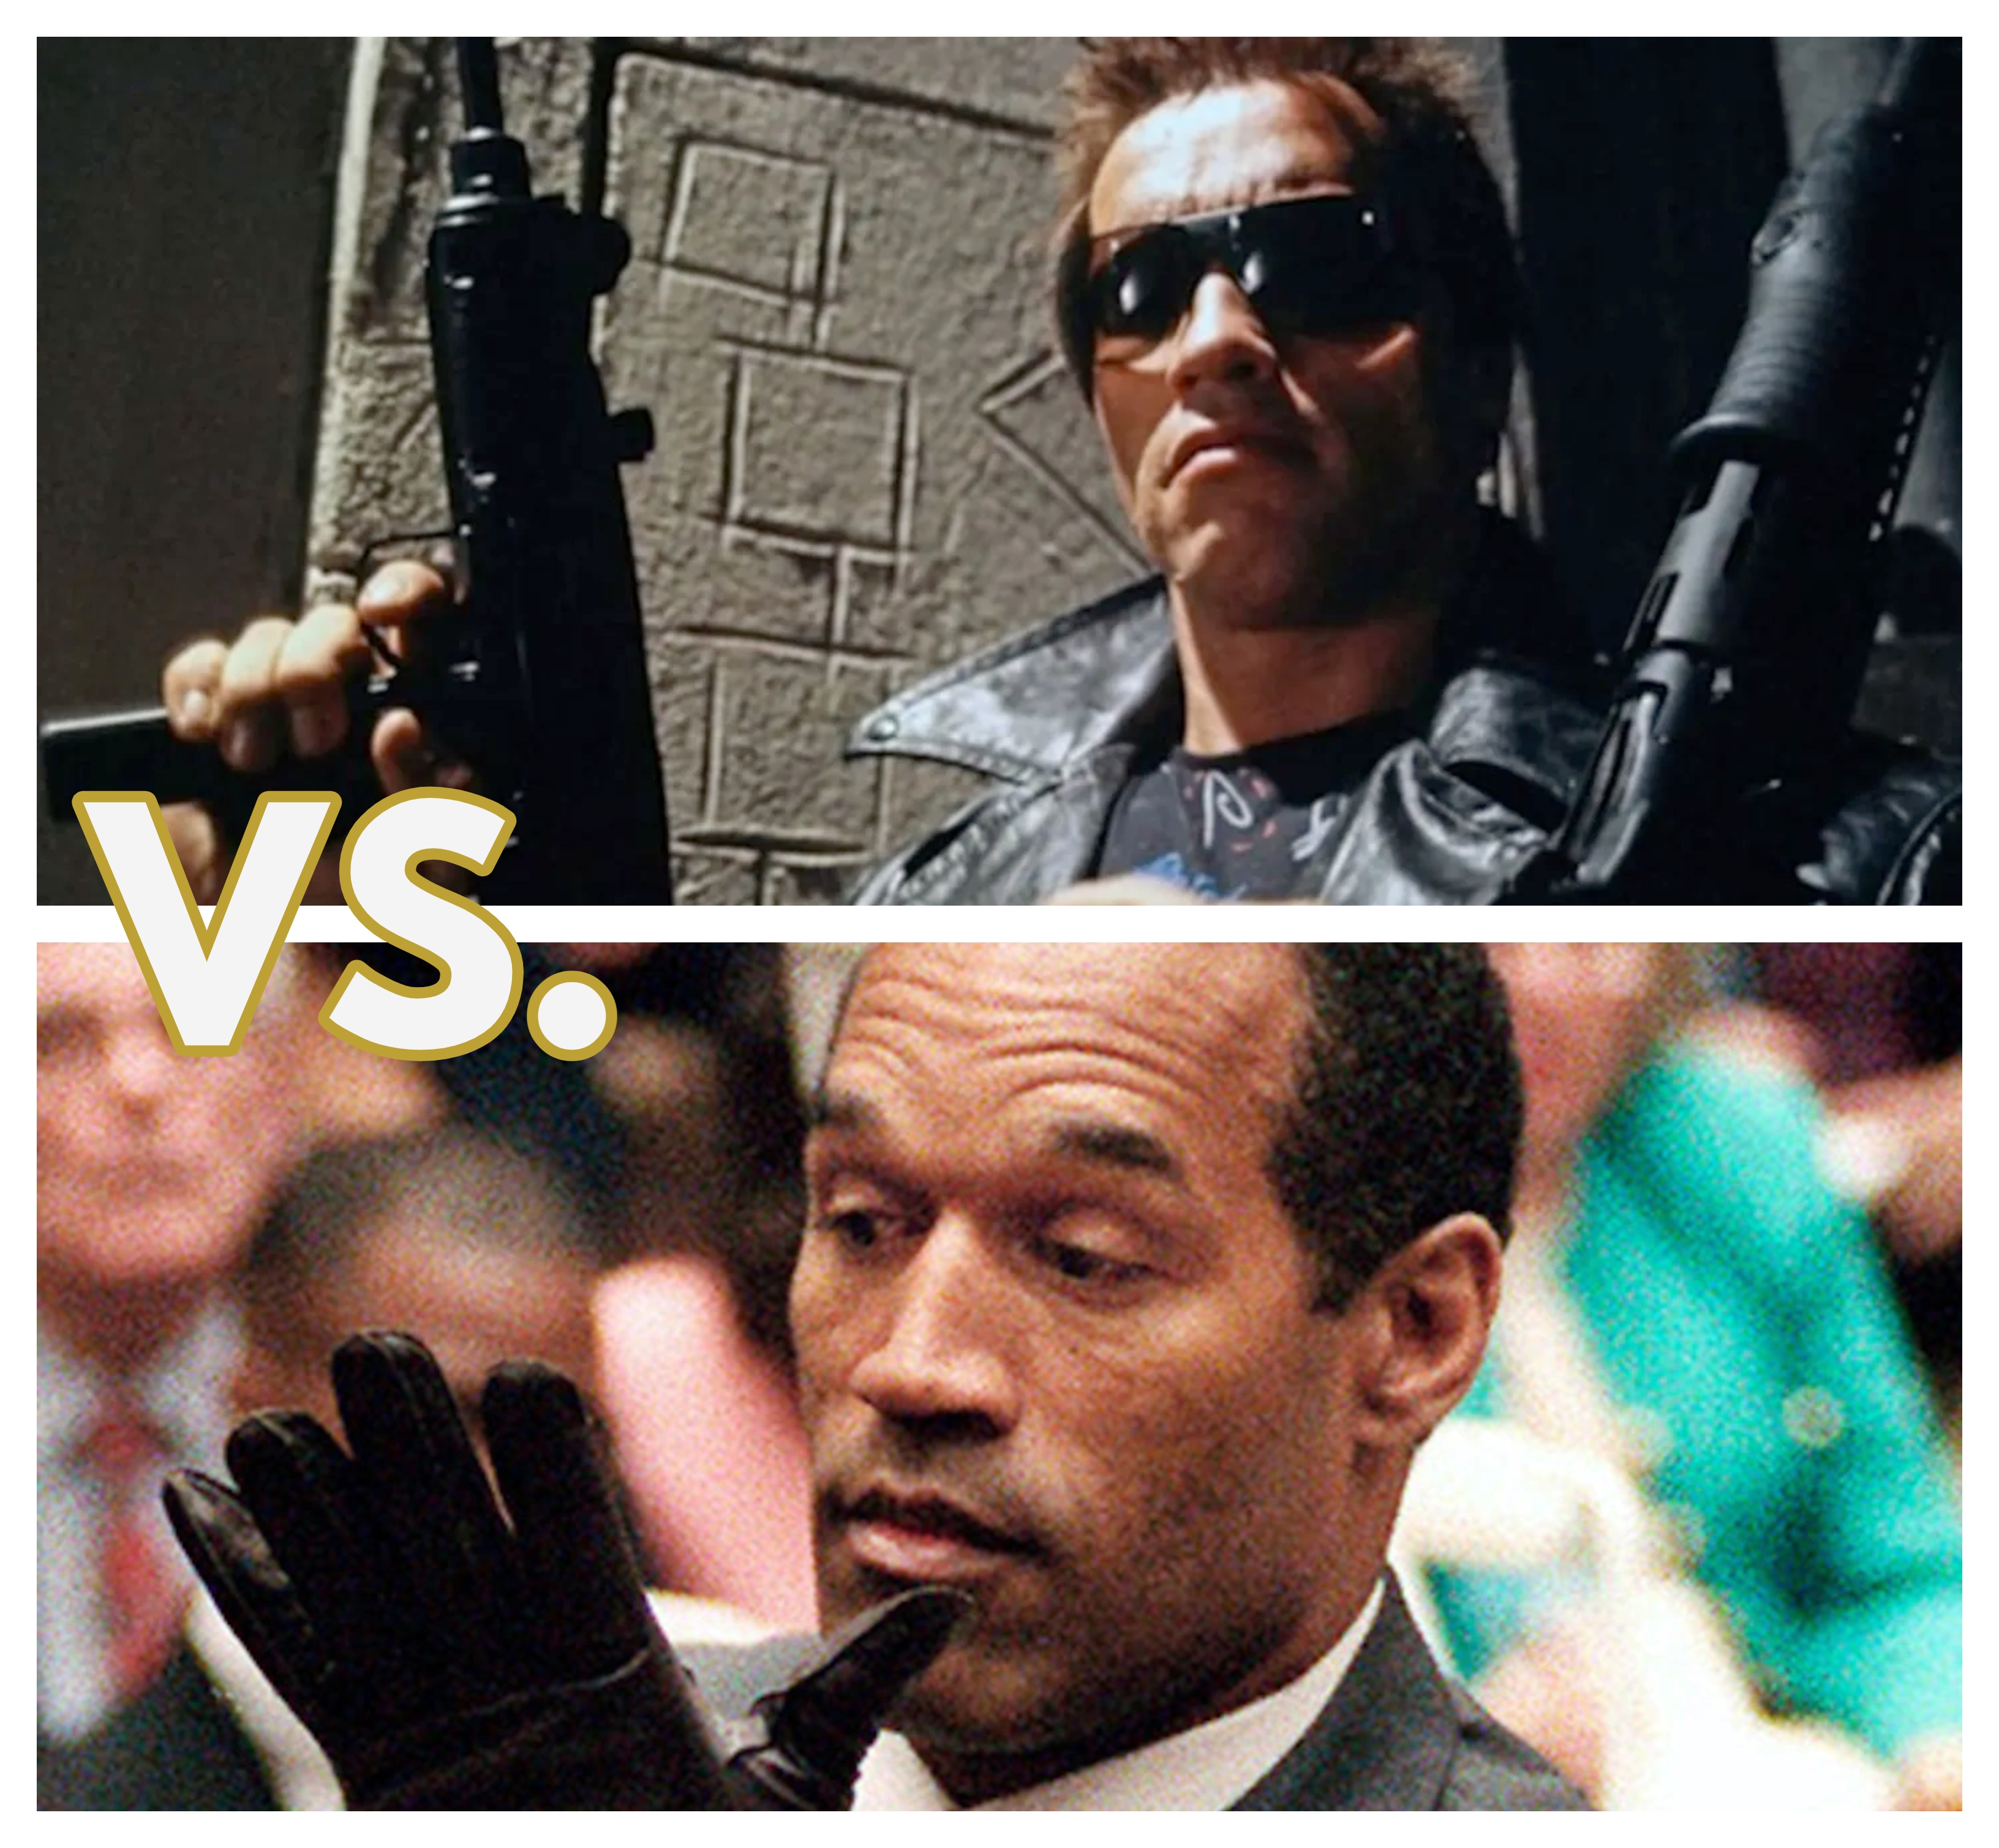 Who Was The Early Choice To Play The Role Of The Terminator Before Arnold Schwarzenegger?